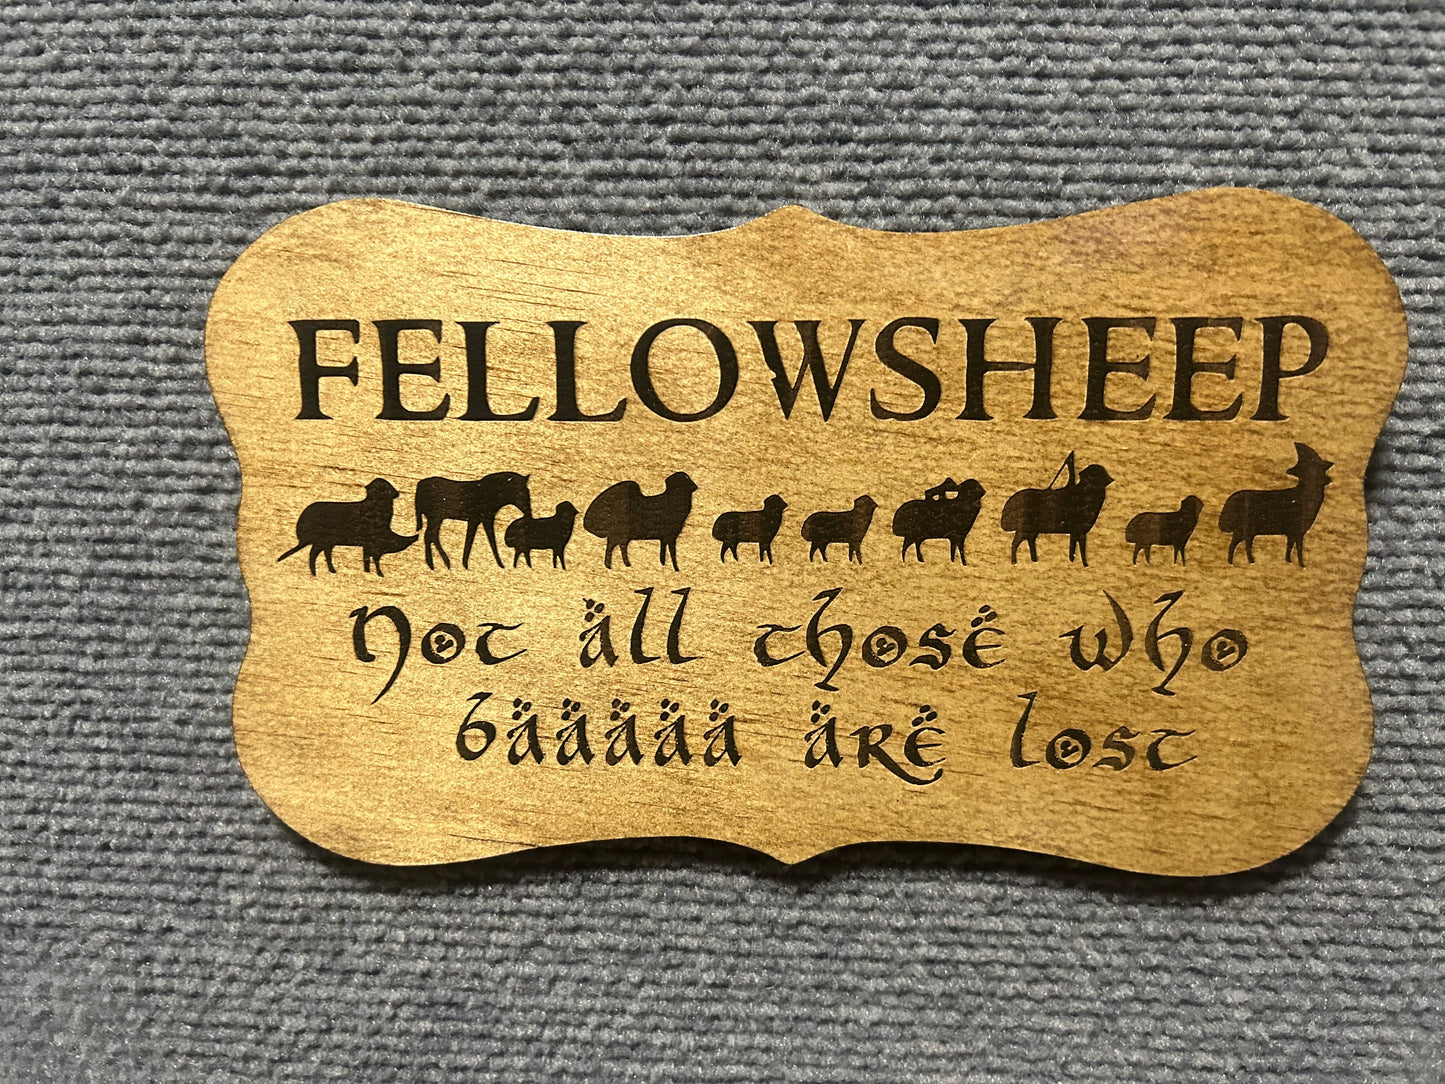 Fellowsheep of the Ring